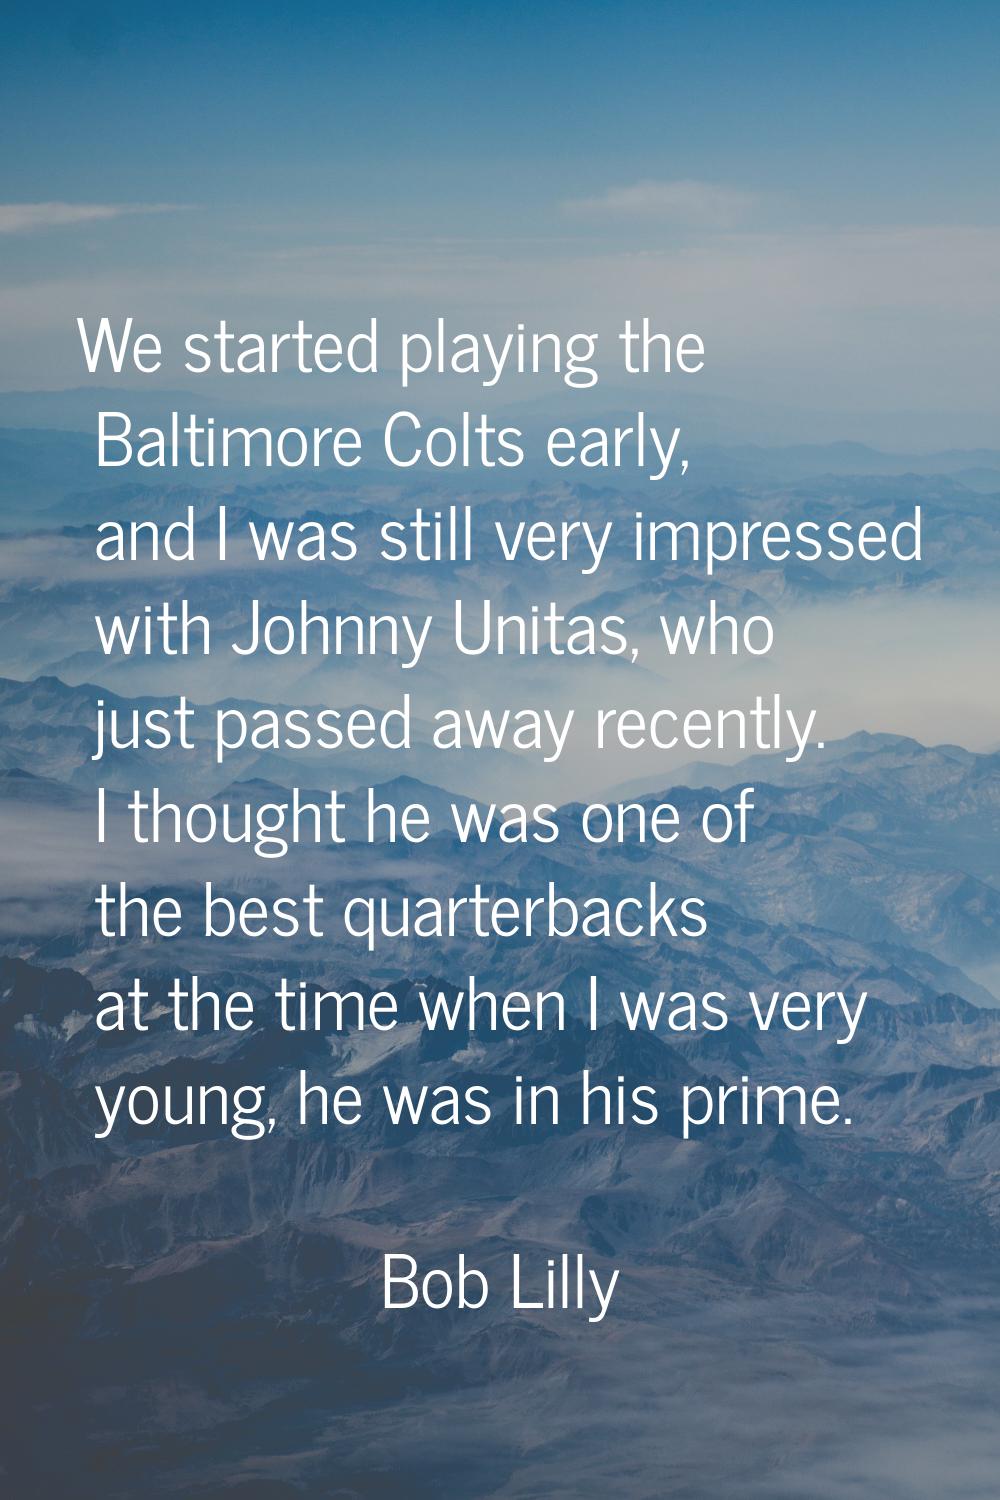 We started playing the Baltimore Colts early, and I was still very impressed with Johnny Unitas, wh